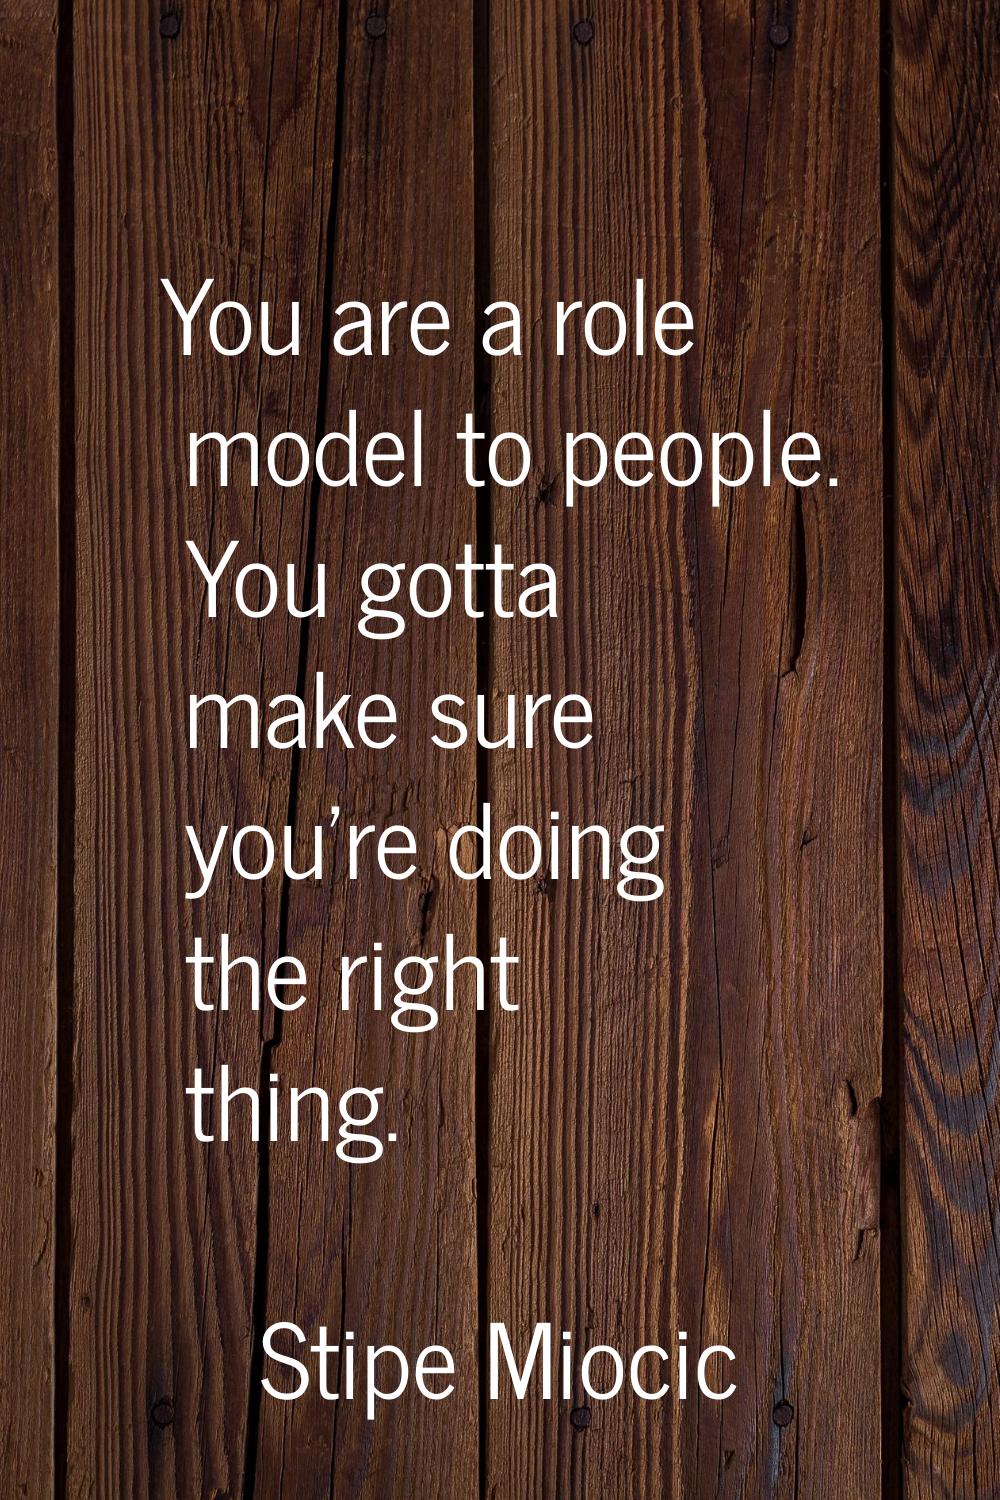 You are a role model to people. You gotta make sure you're doing the right thing.